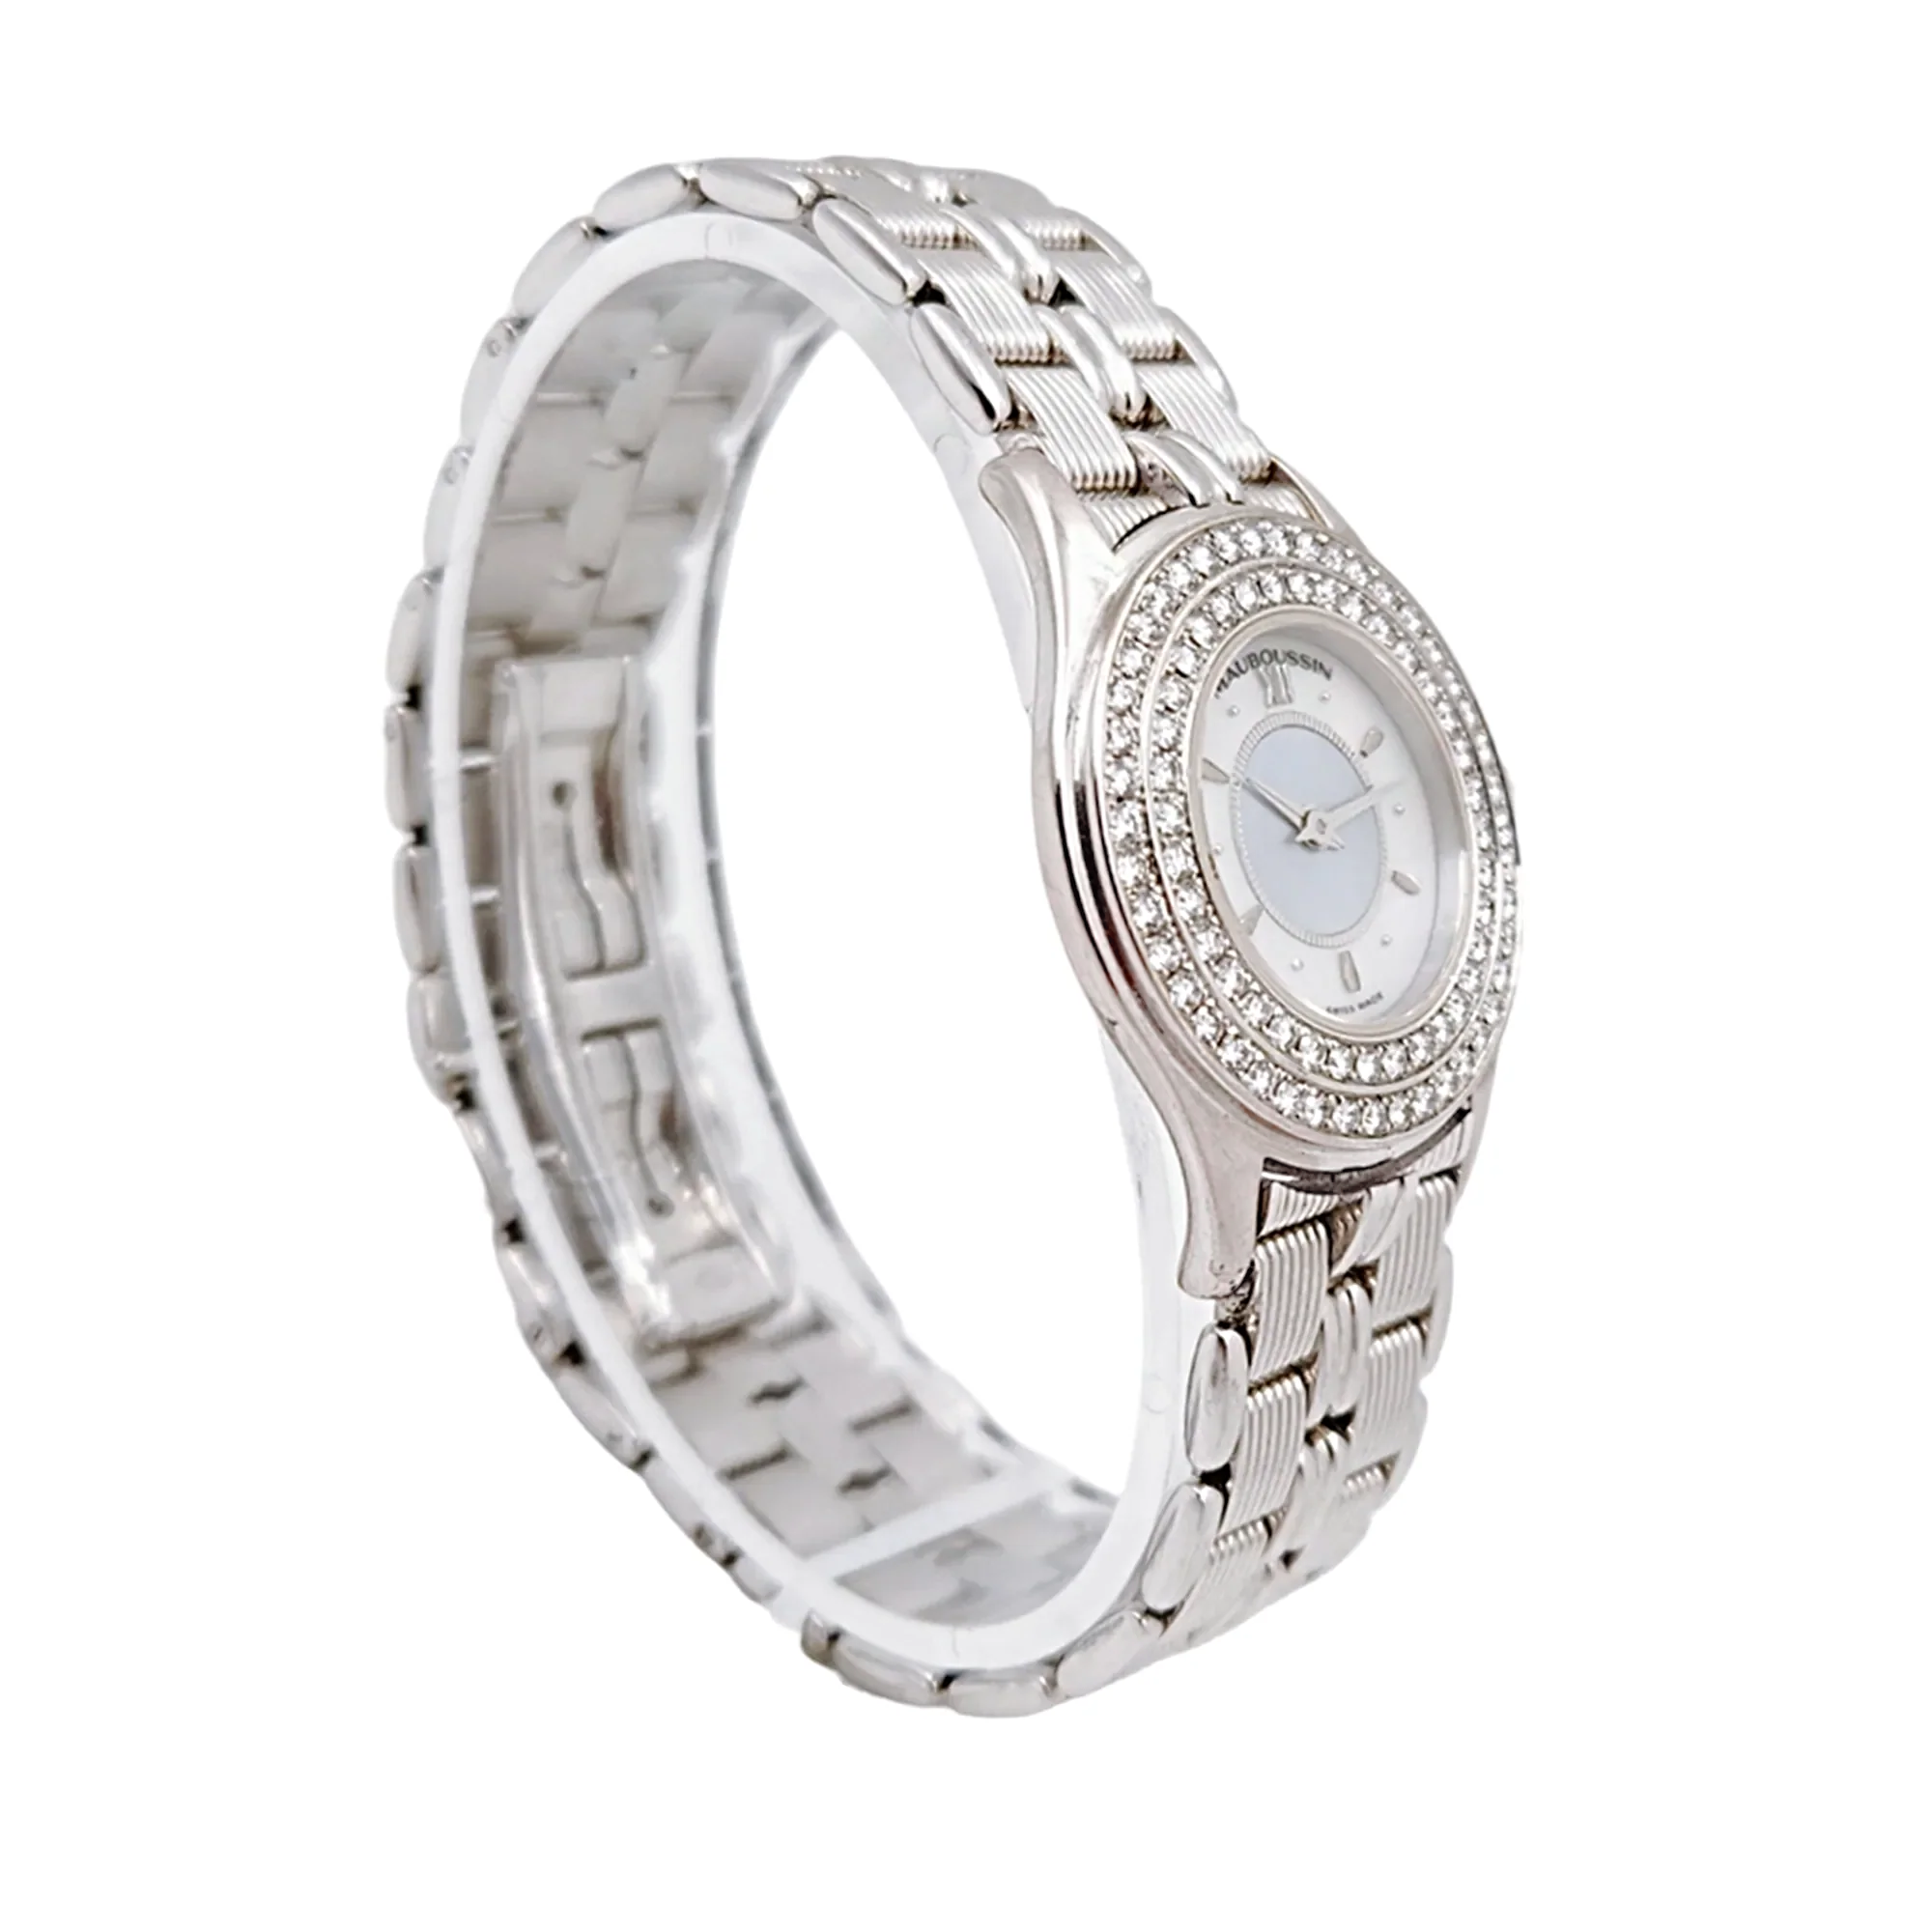 Ladies Mauboussin 26mm - 18K White Gold Watch With Mother of Peal Dial and Diamond Bezel. (Pre-Owned 63683)